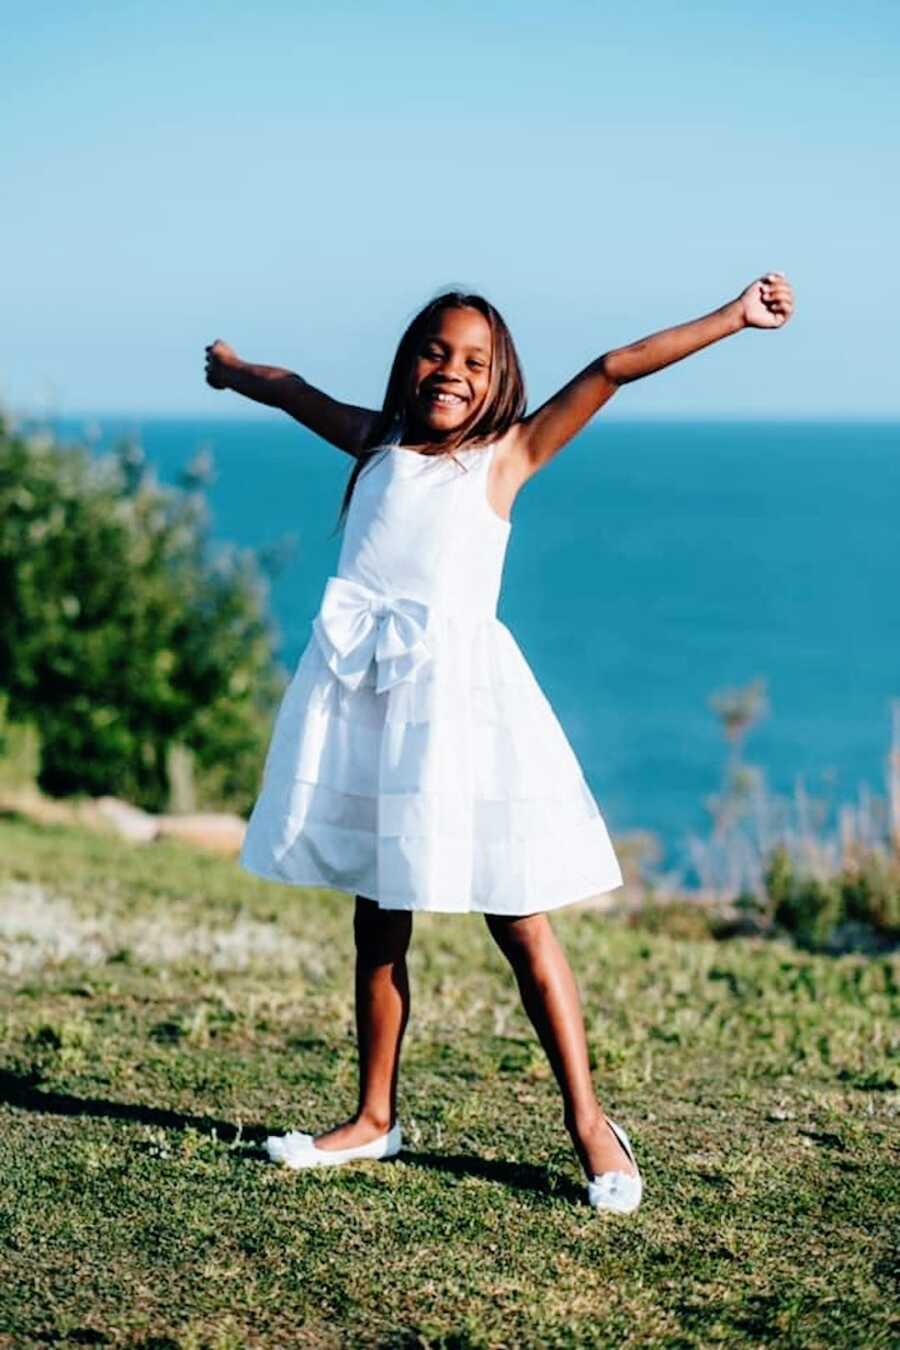 young girl poses outside by the water with her arms outstretched and a smile